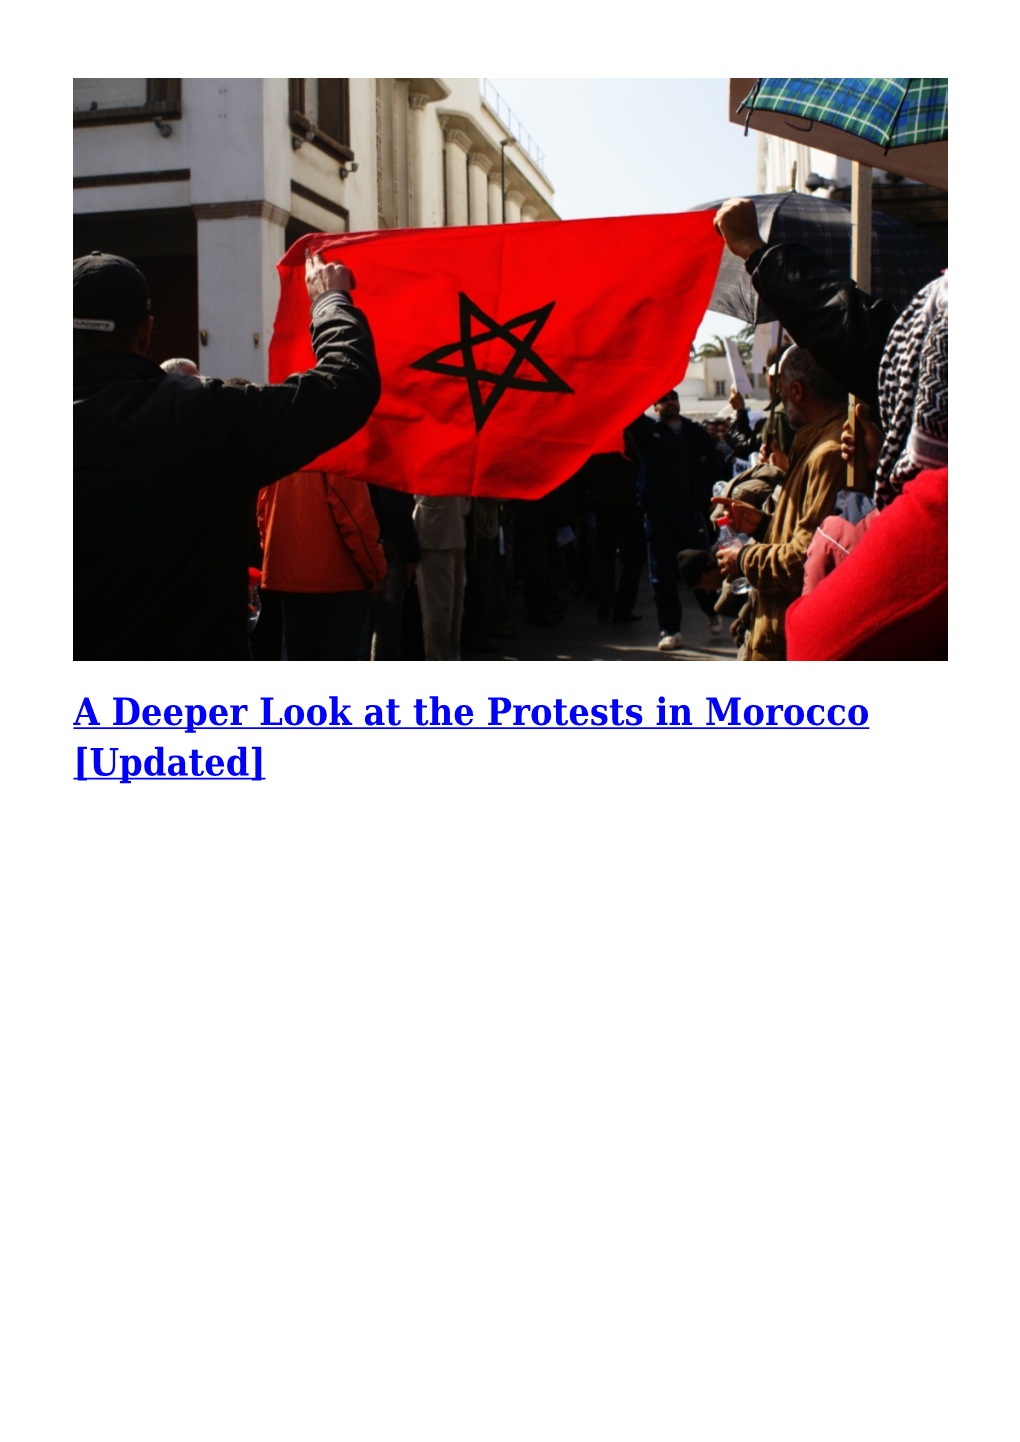 A Deeper Look at the Protests in Morocco [Updated] June 1, 2017